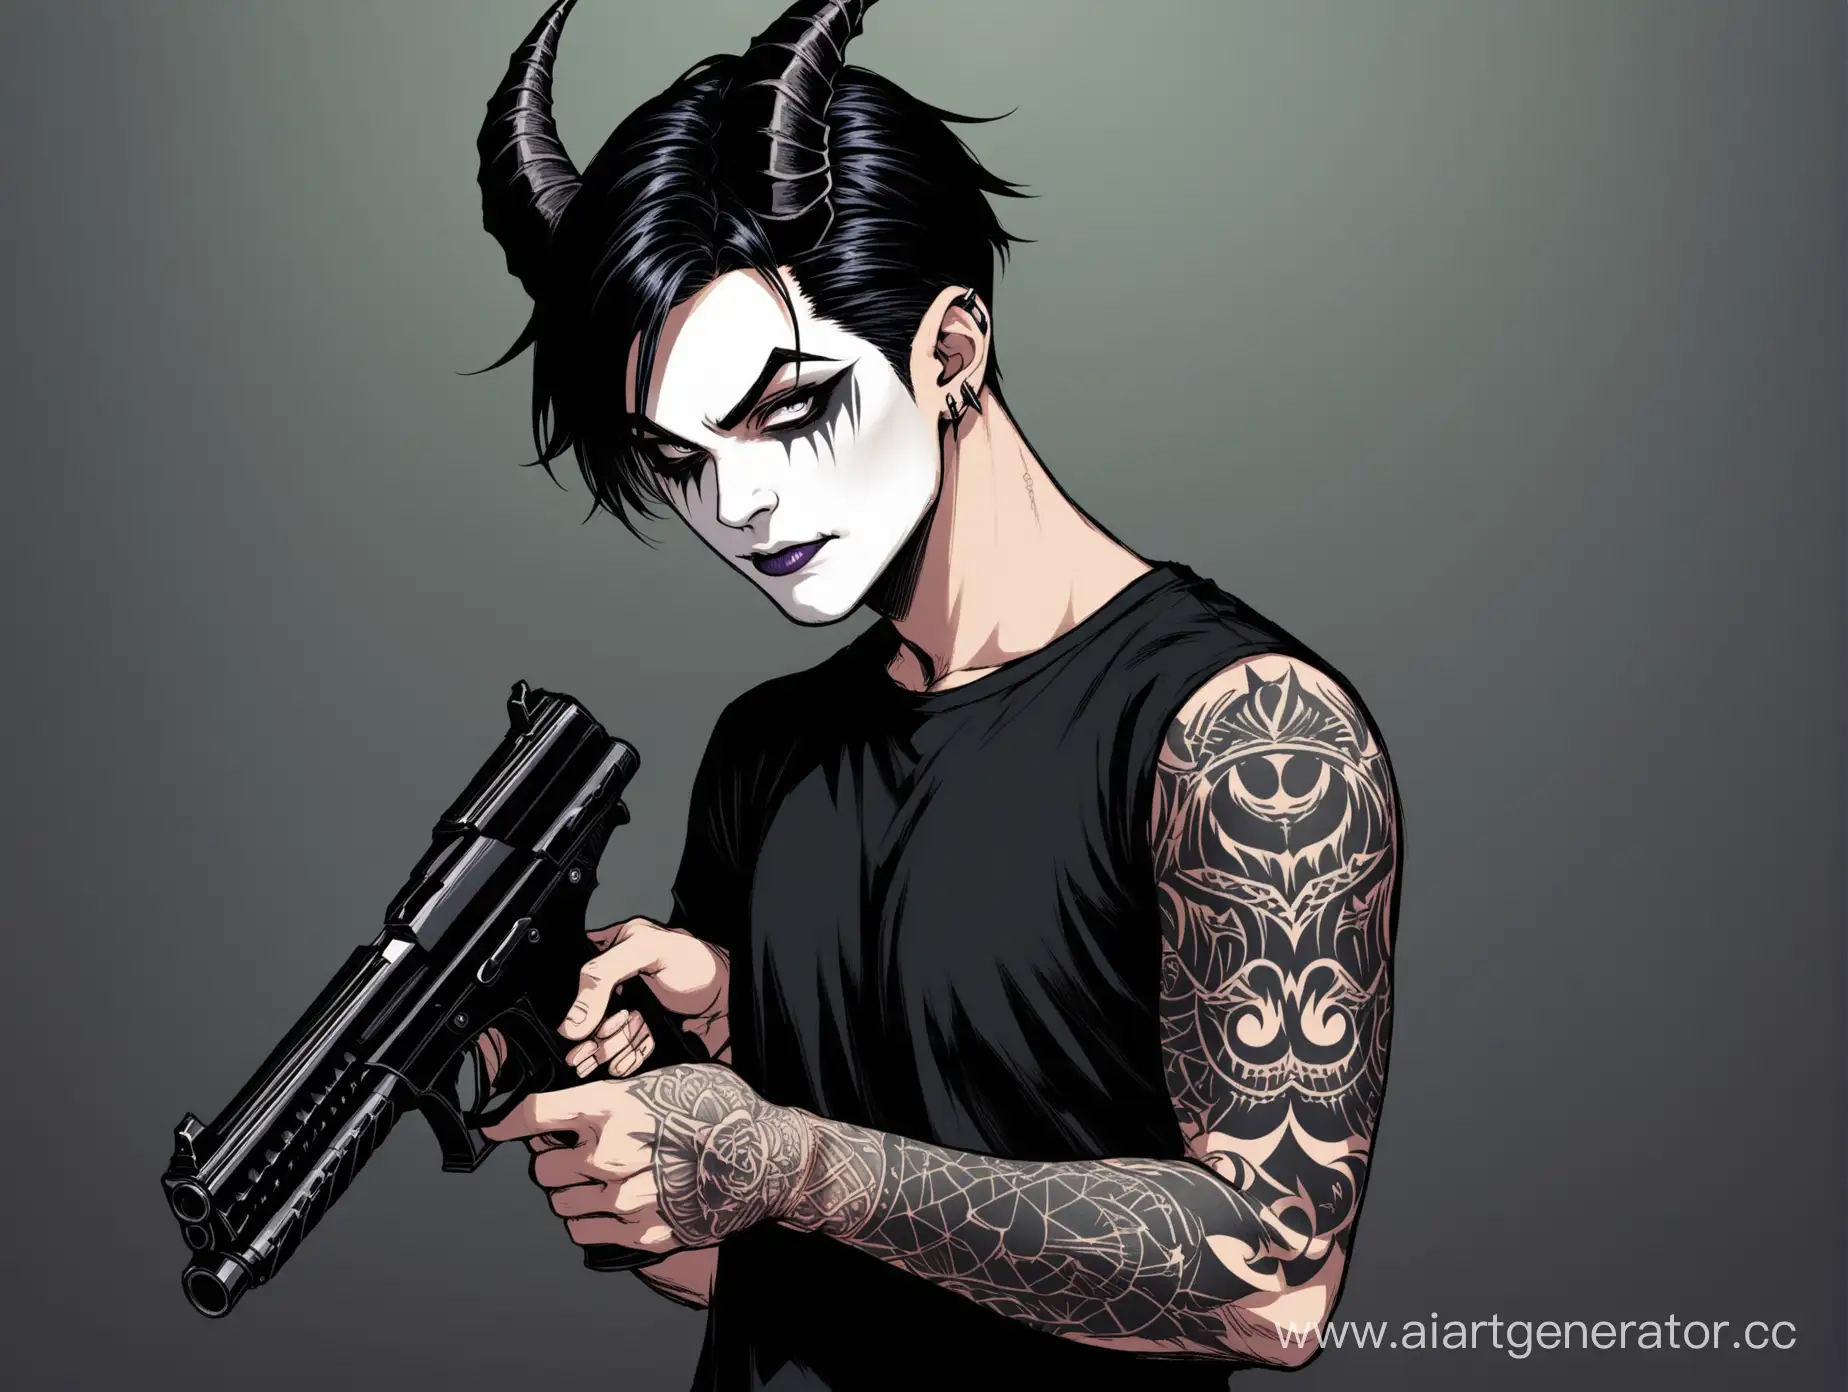 Young-Man-with-MaleficentInspired-Face-Tattoos-Holding-Gun